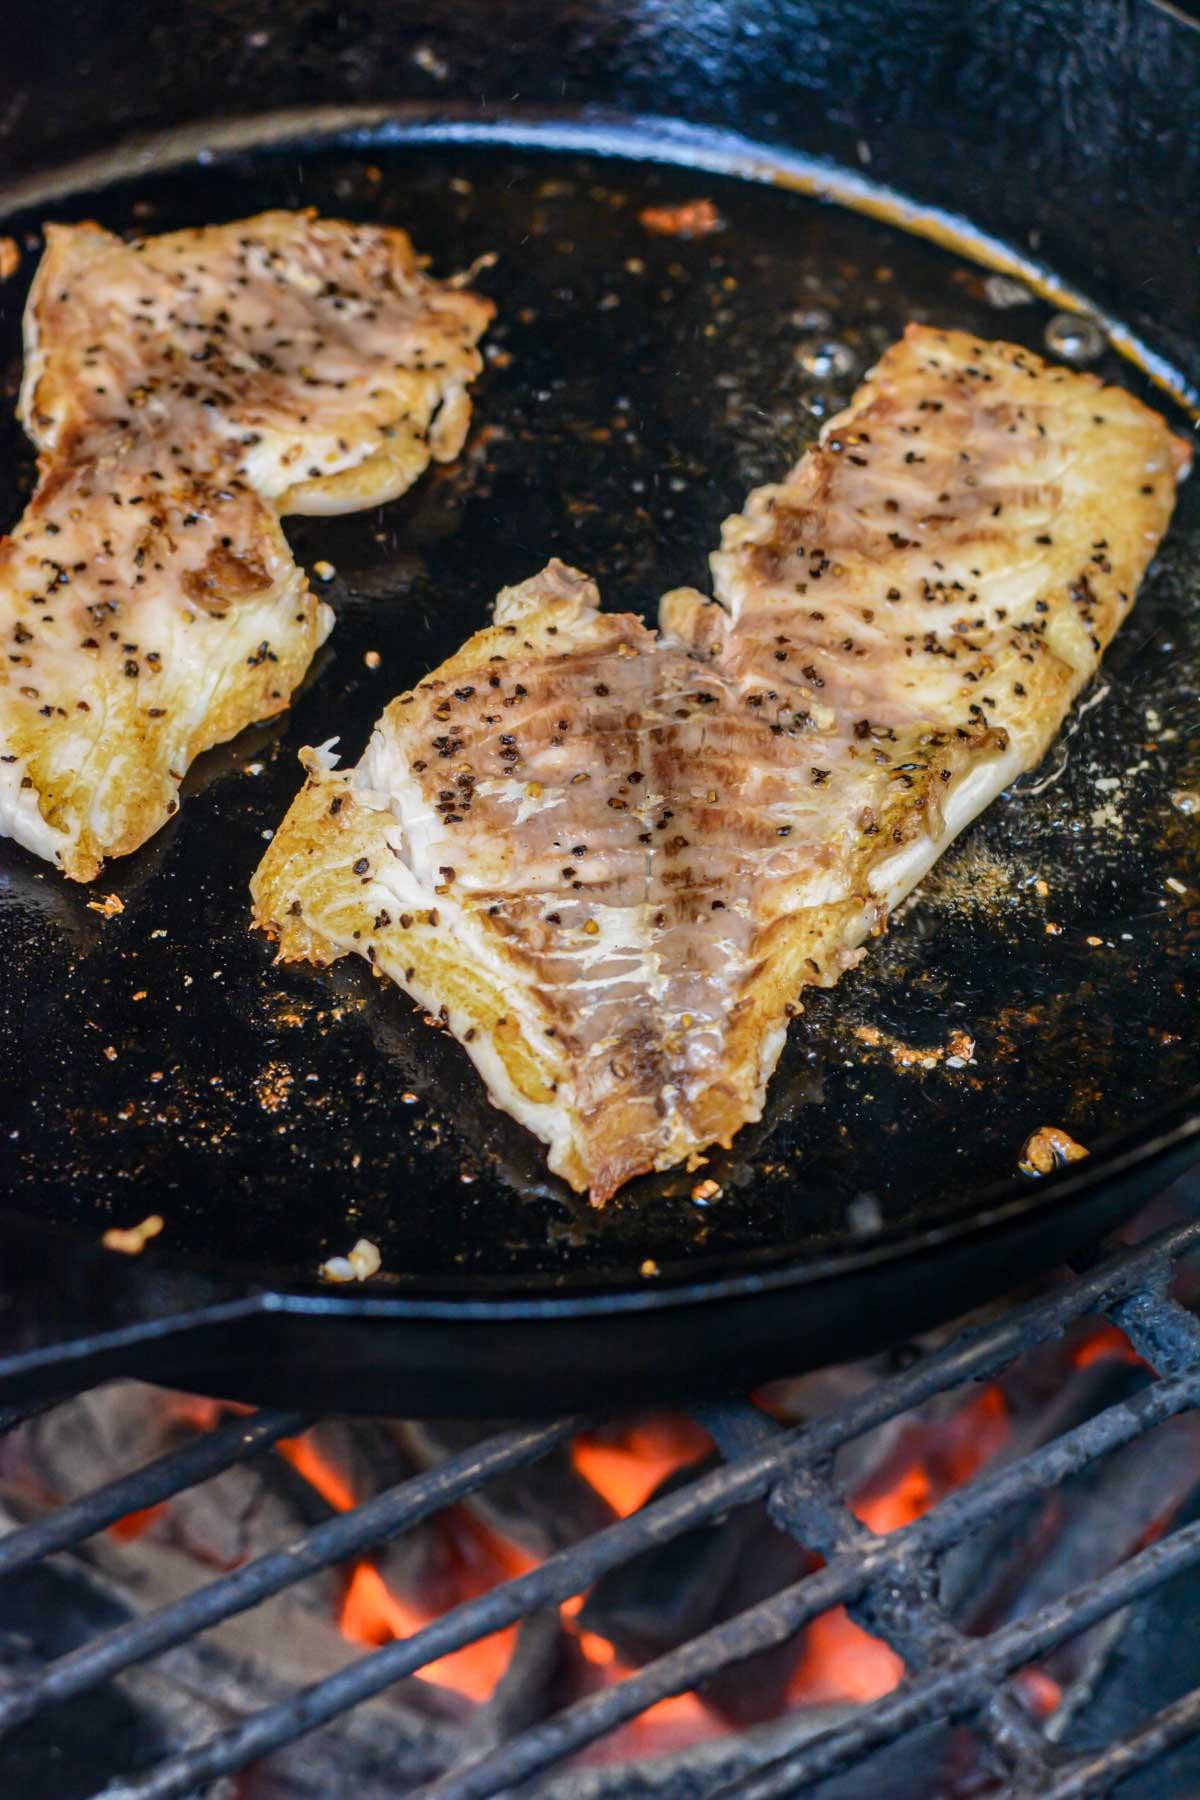 Grilled Sheepshead with a Garlic Butter Topping